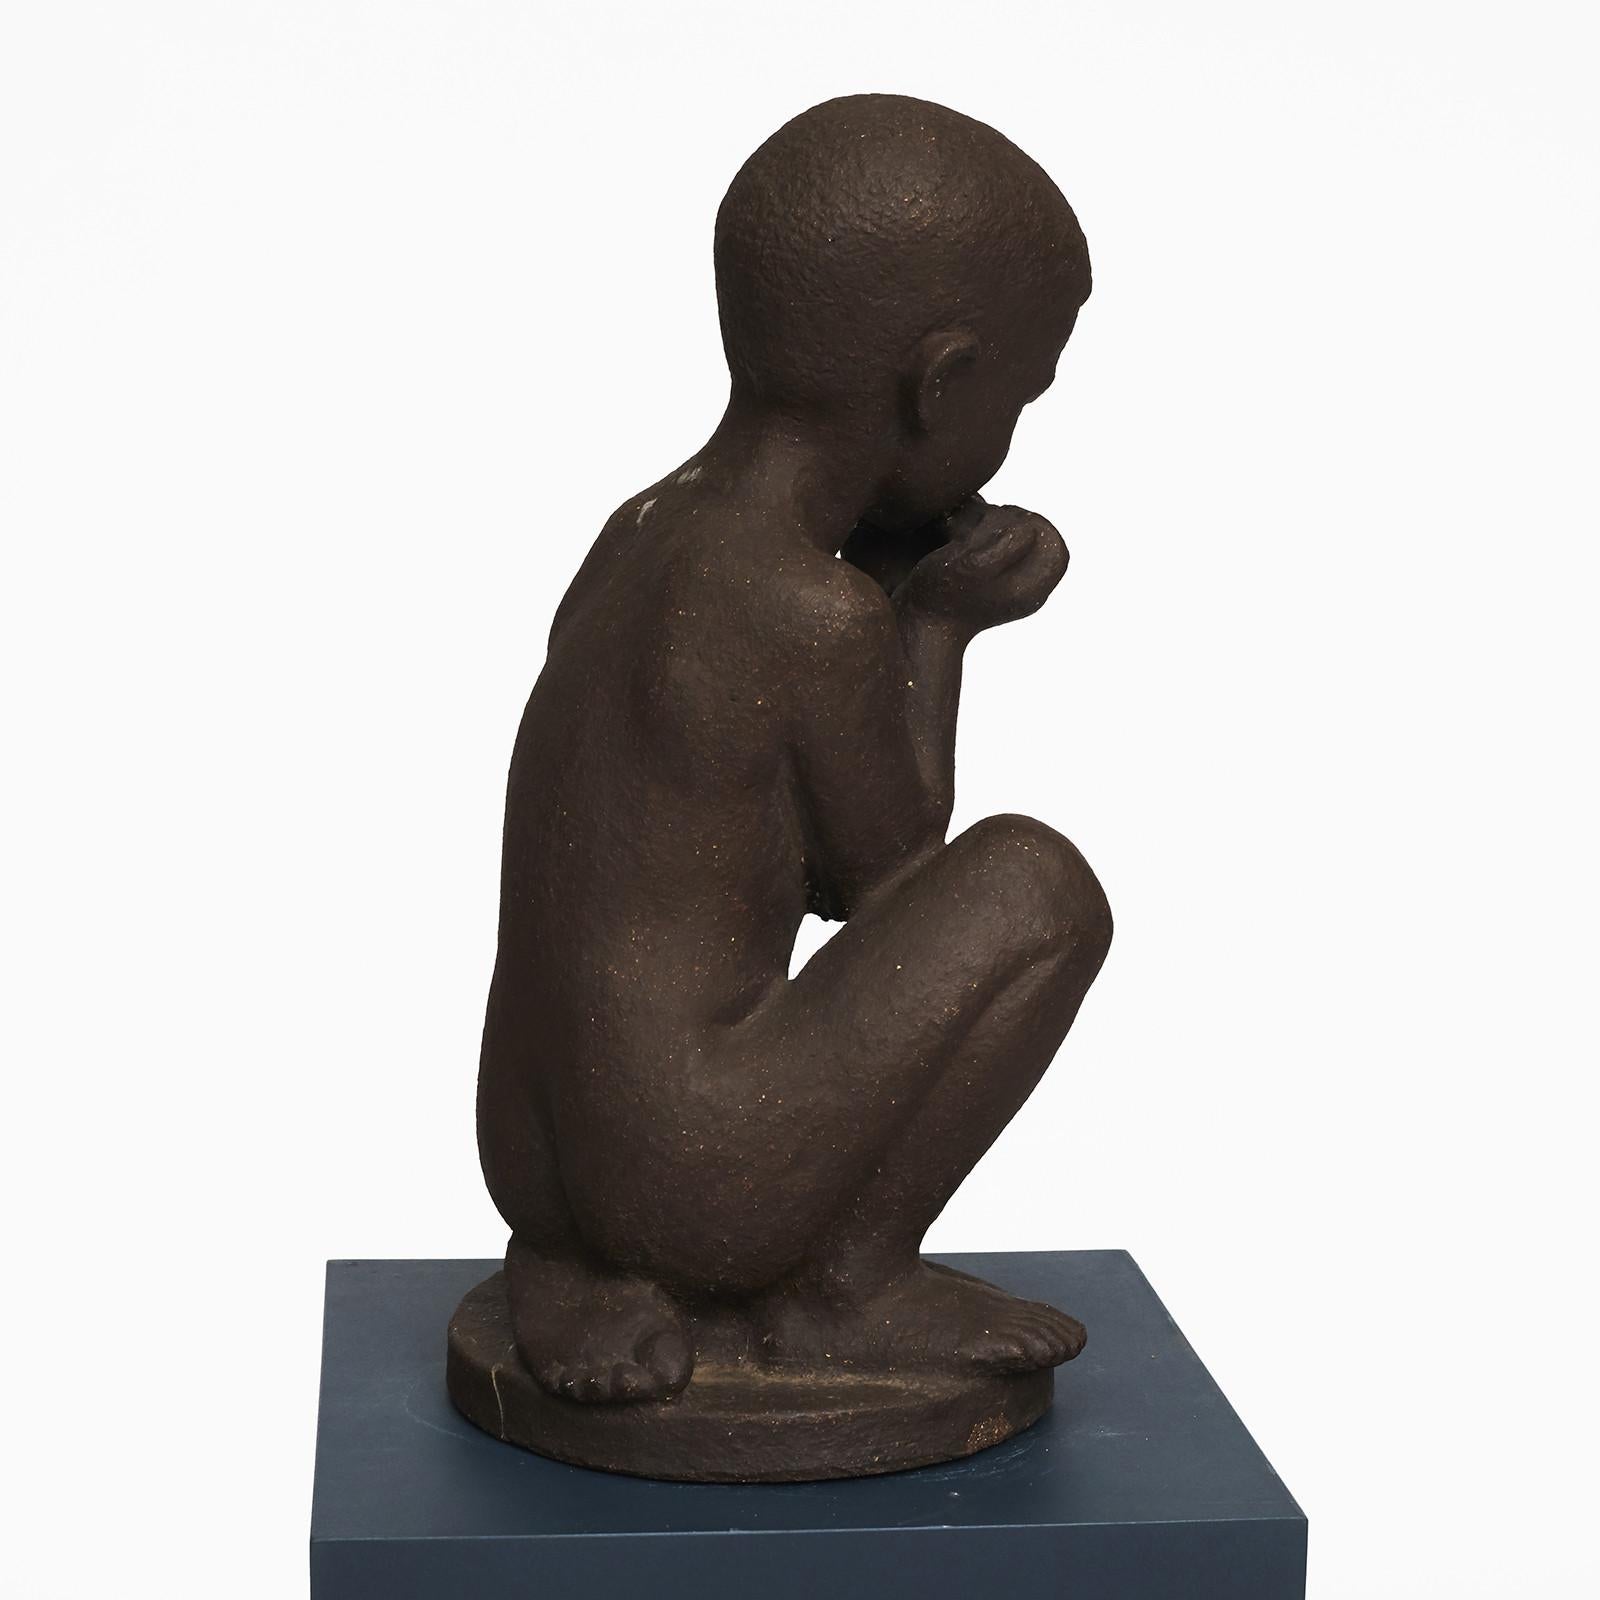 Large ceramic figurine.
Designed by Johannes Hansen (1903-1995) and manufactured by Knabstrup ceramic factory in Denmark.
Boy playing harmonica.
The figurine are made of dark chamotte clay without glaze.
Has a firing crack on the backside of the